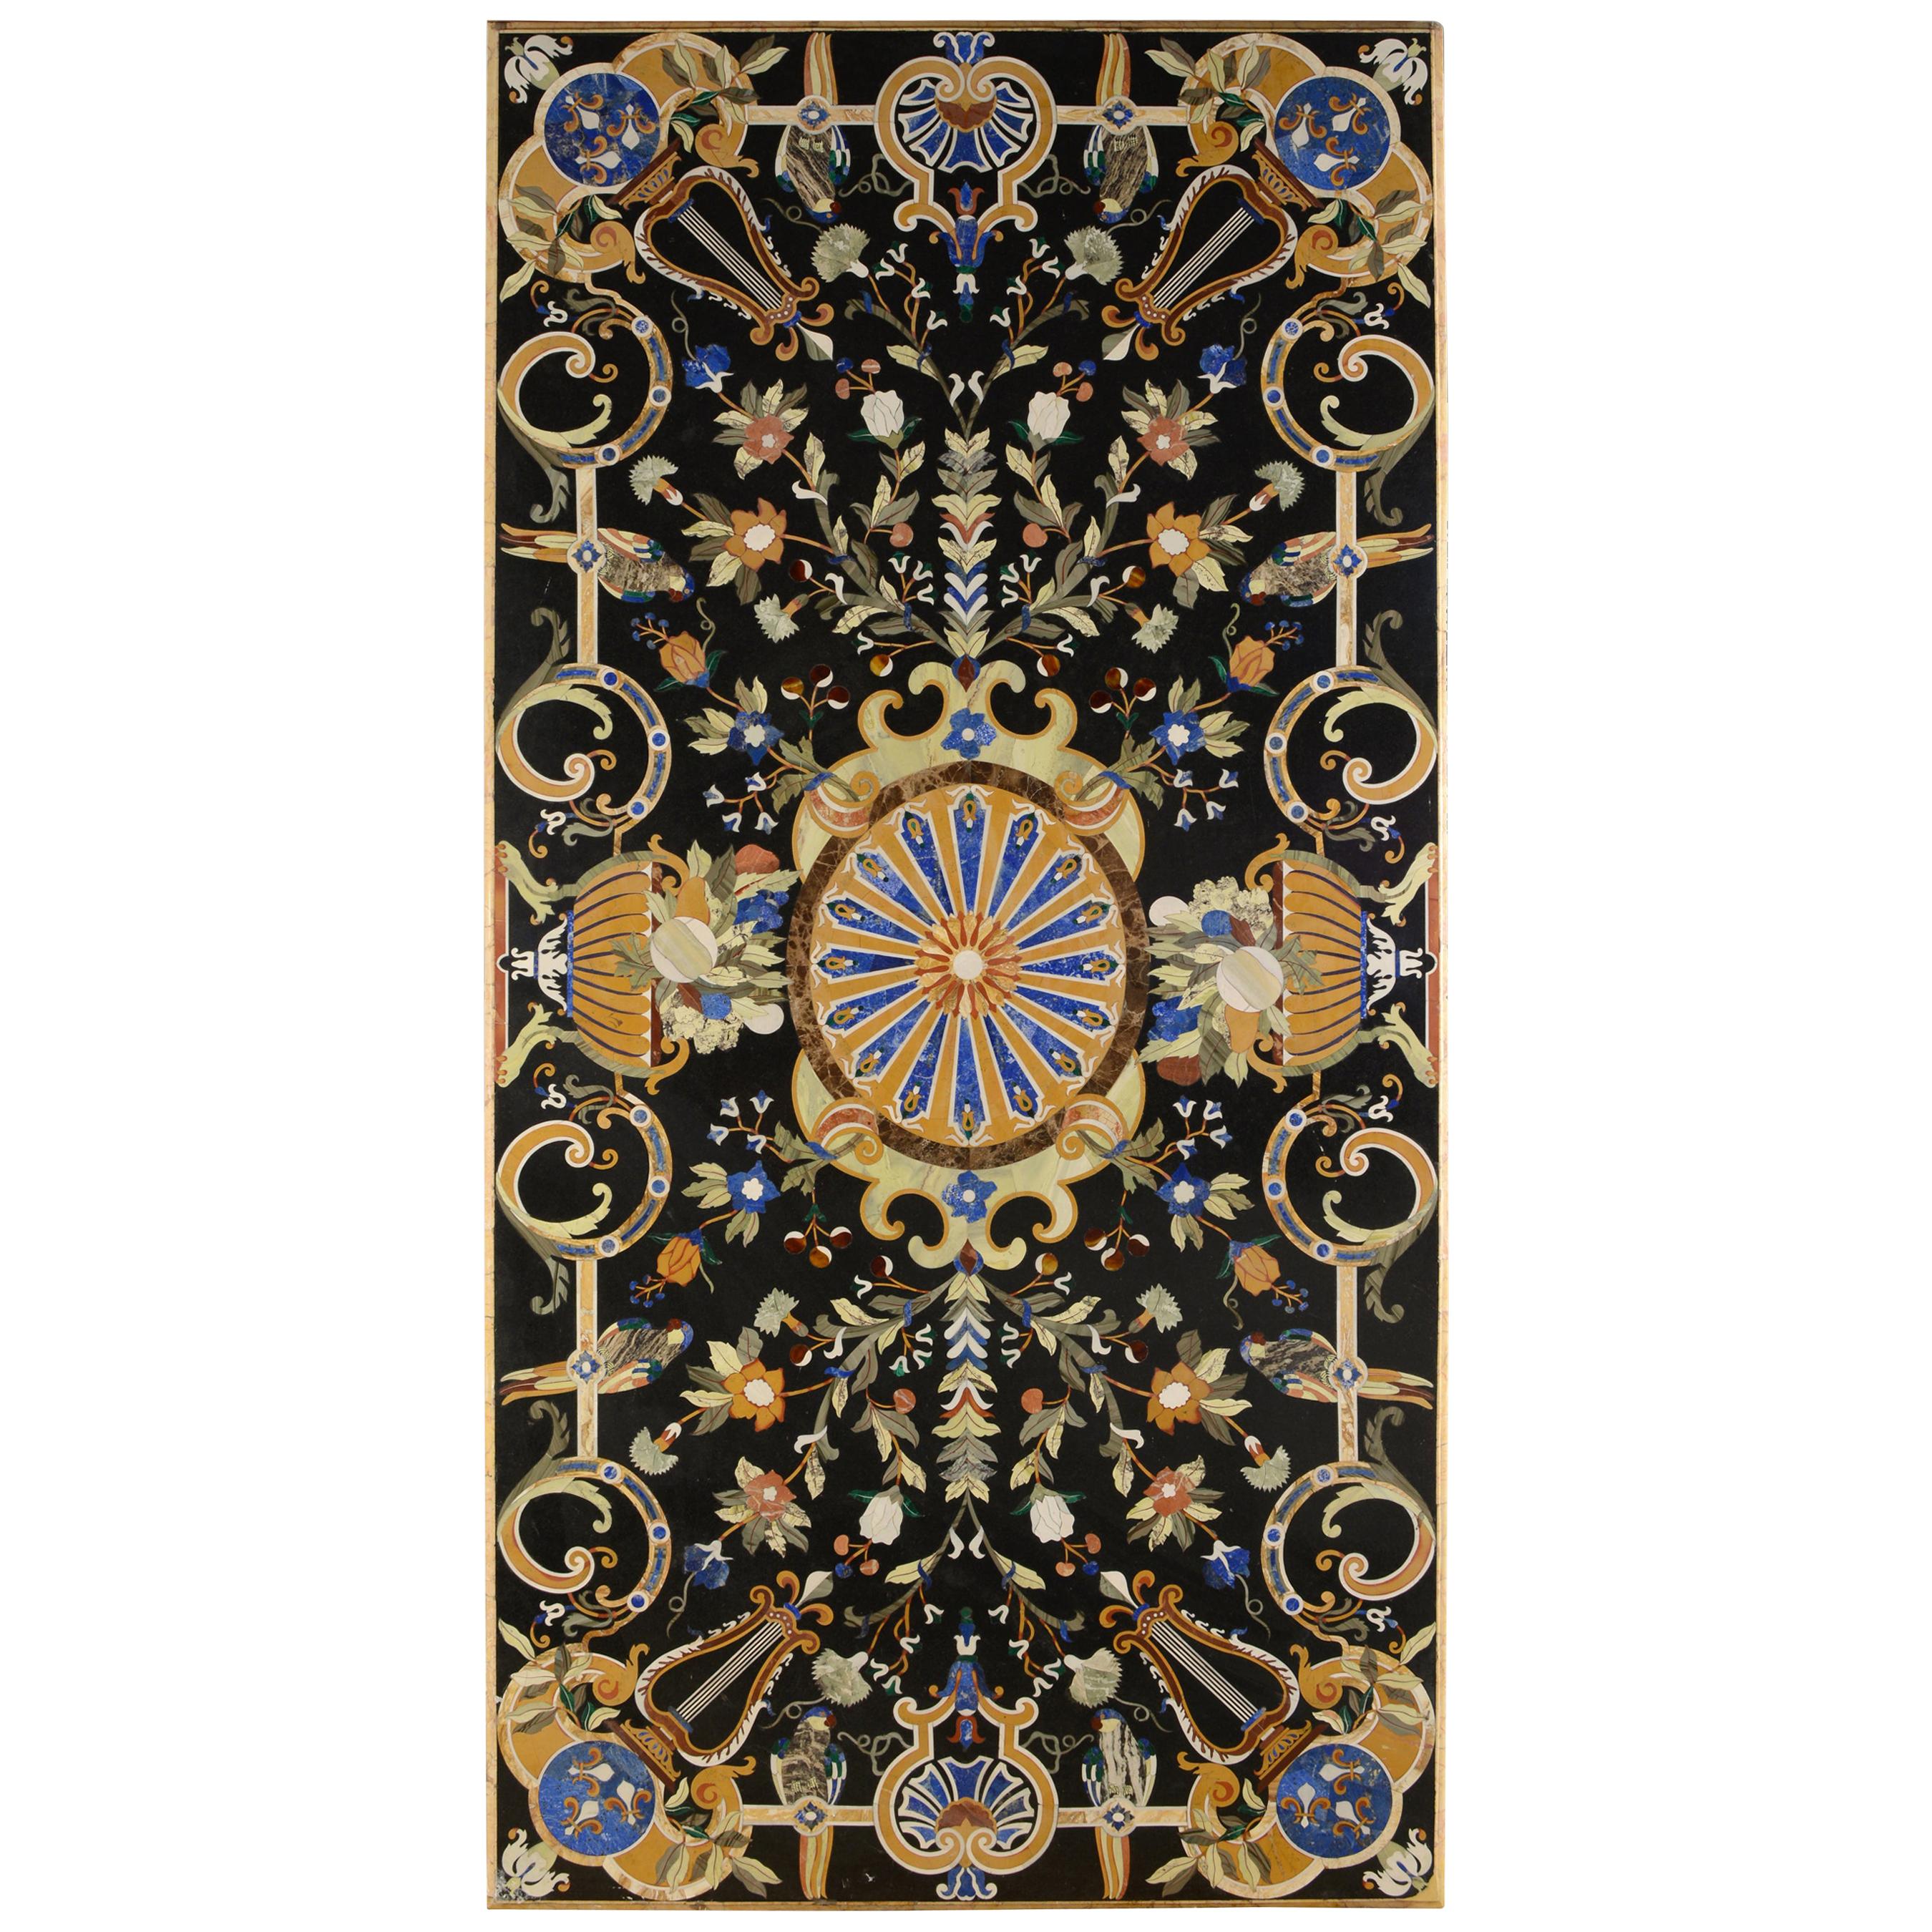 Rectangular Pietra Dura Table Top, Marble and Hard Stones, It Has a Restoration For Sale